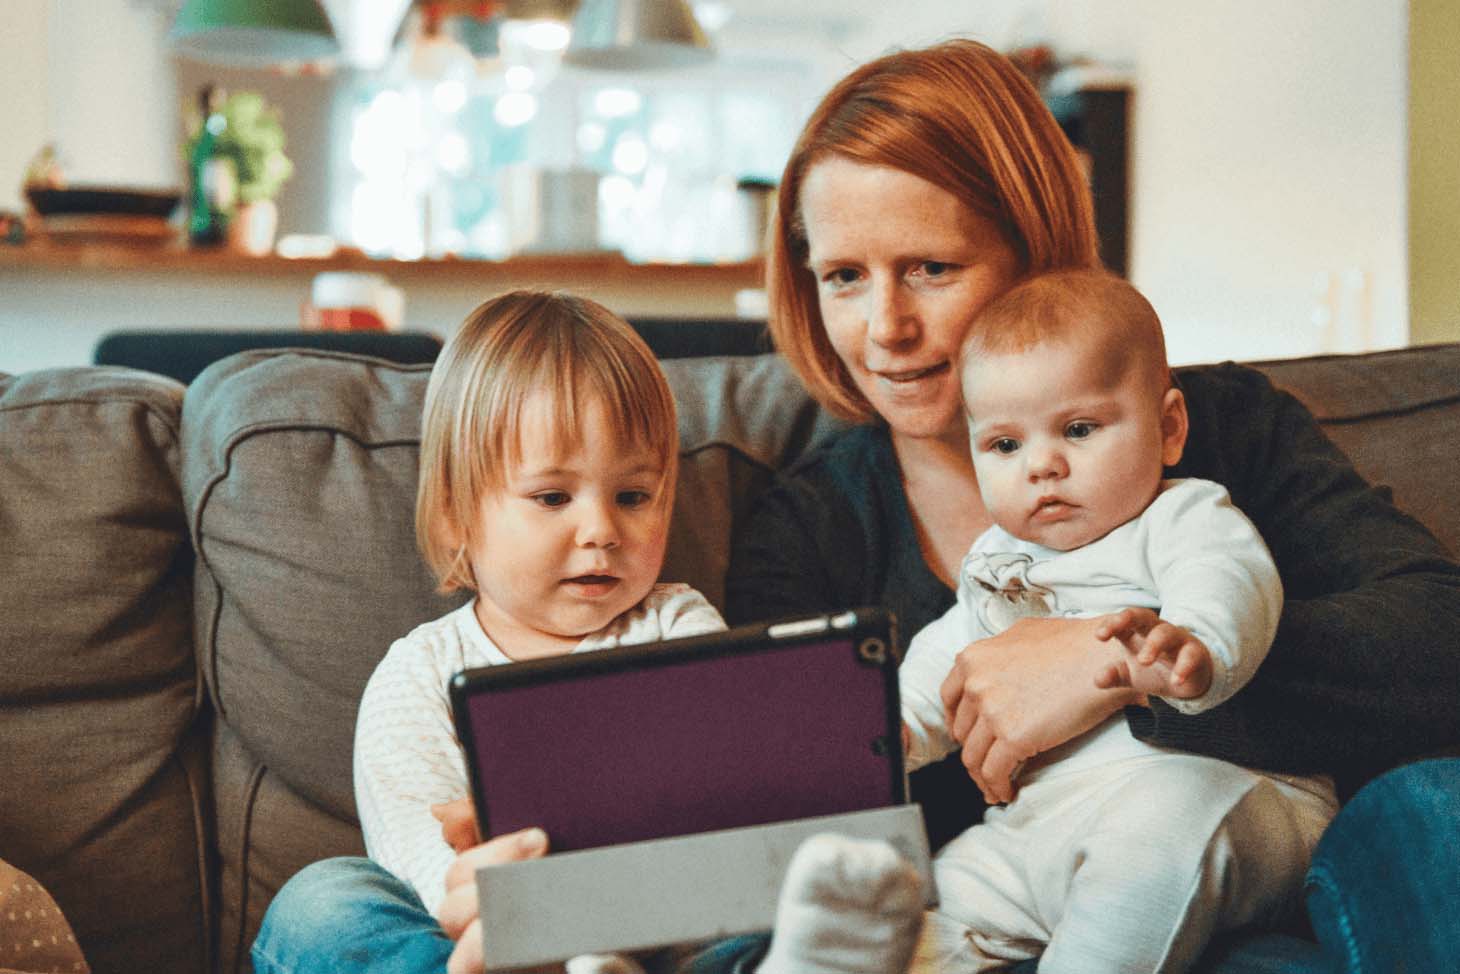 A woman accompanied by two children on a sofa while looking at a tablet.